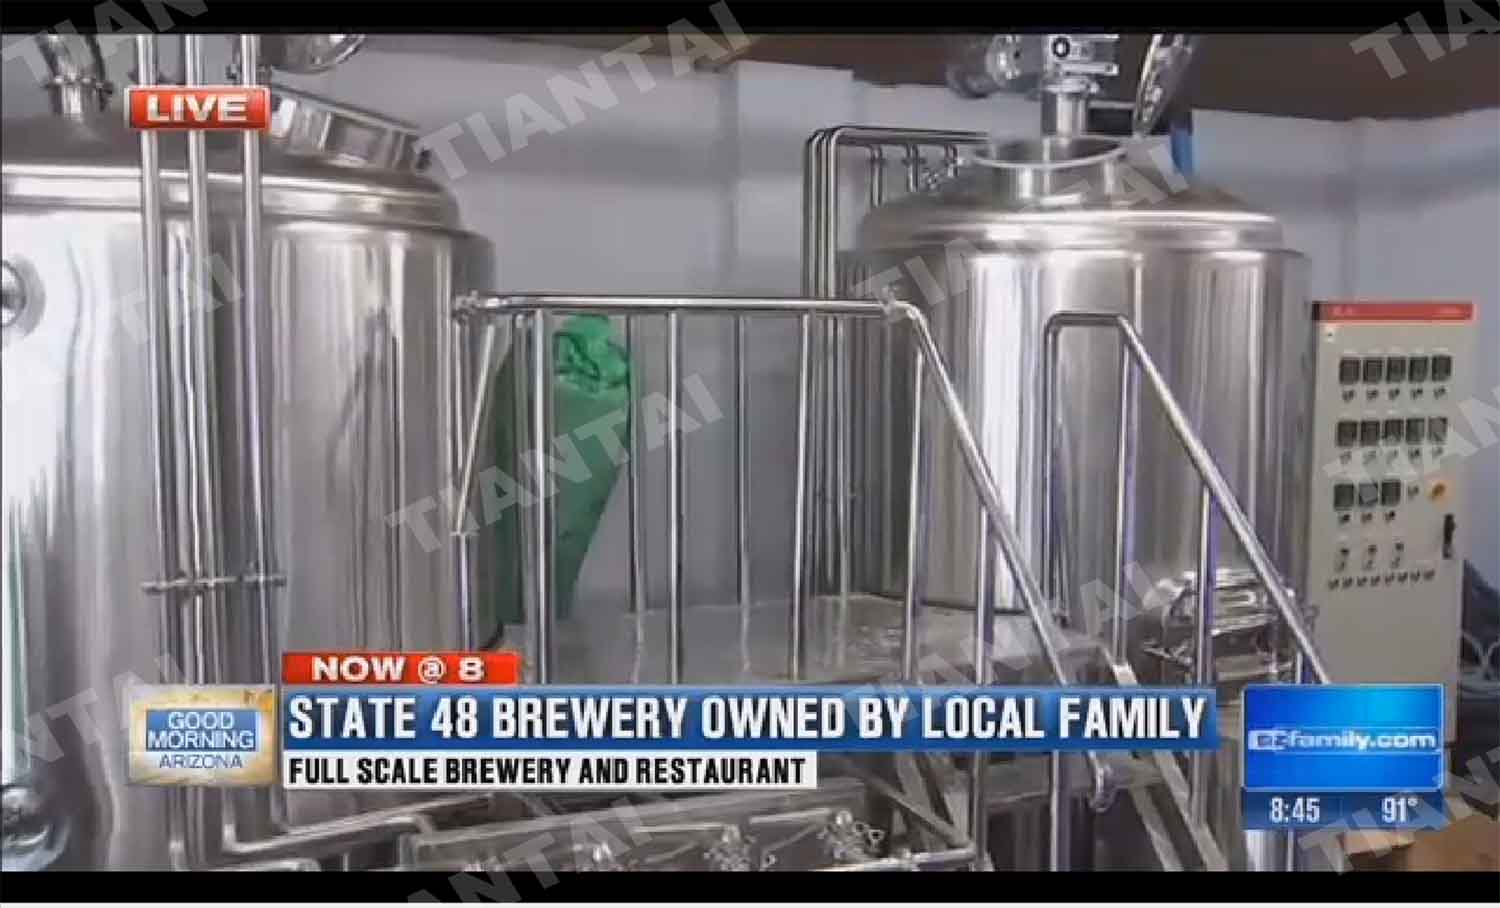 USA customer’s brewery being interviewed by the local